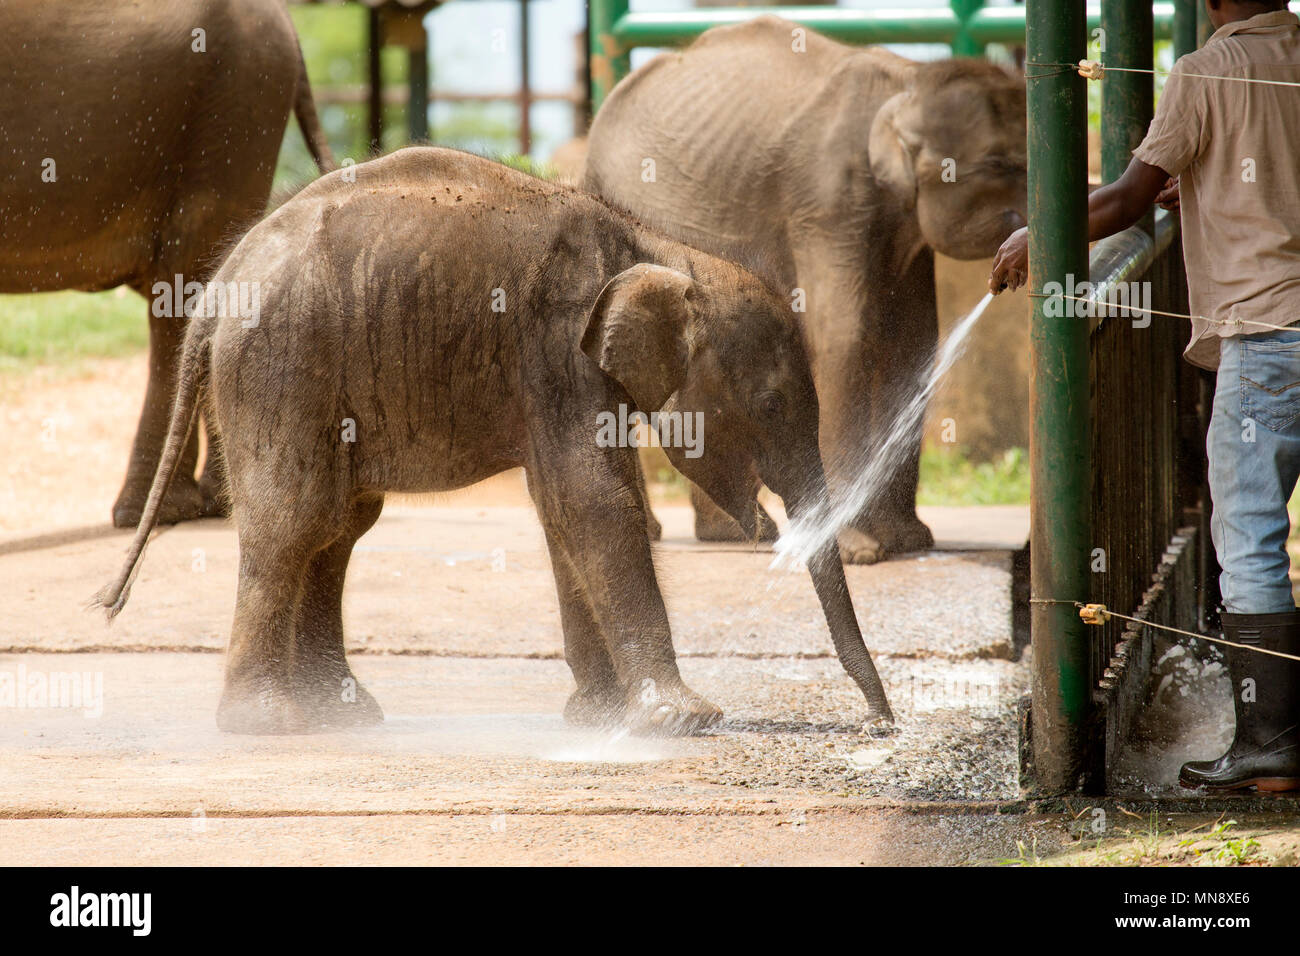 Elephant being sprayed with water at the Udwawalawe Elephant Transit Home at Uwawalawe National Park in Sri Lanka. Wild elephants are fed at the facil Stock Photo